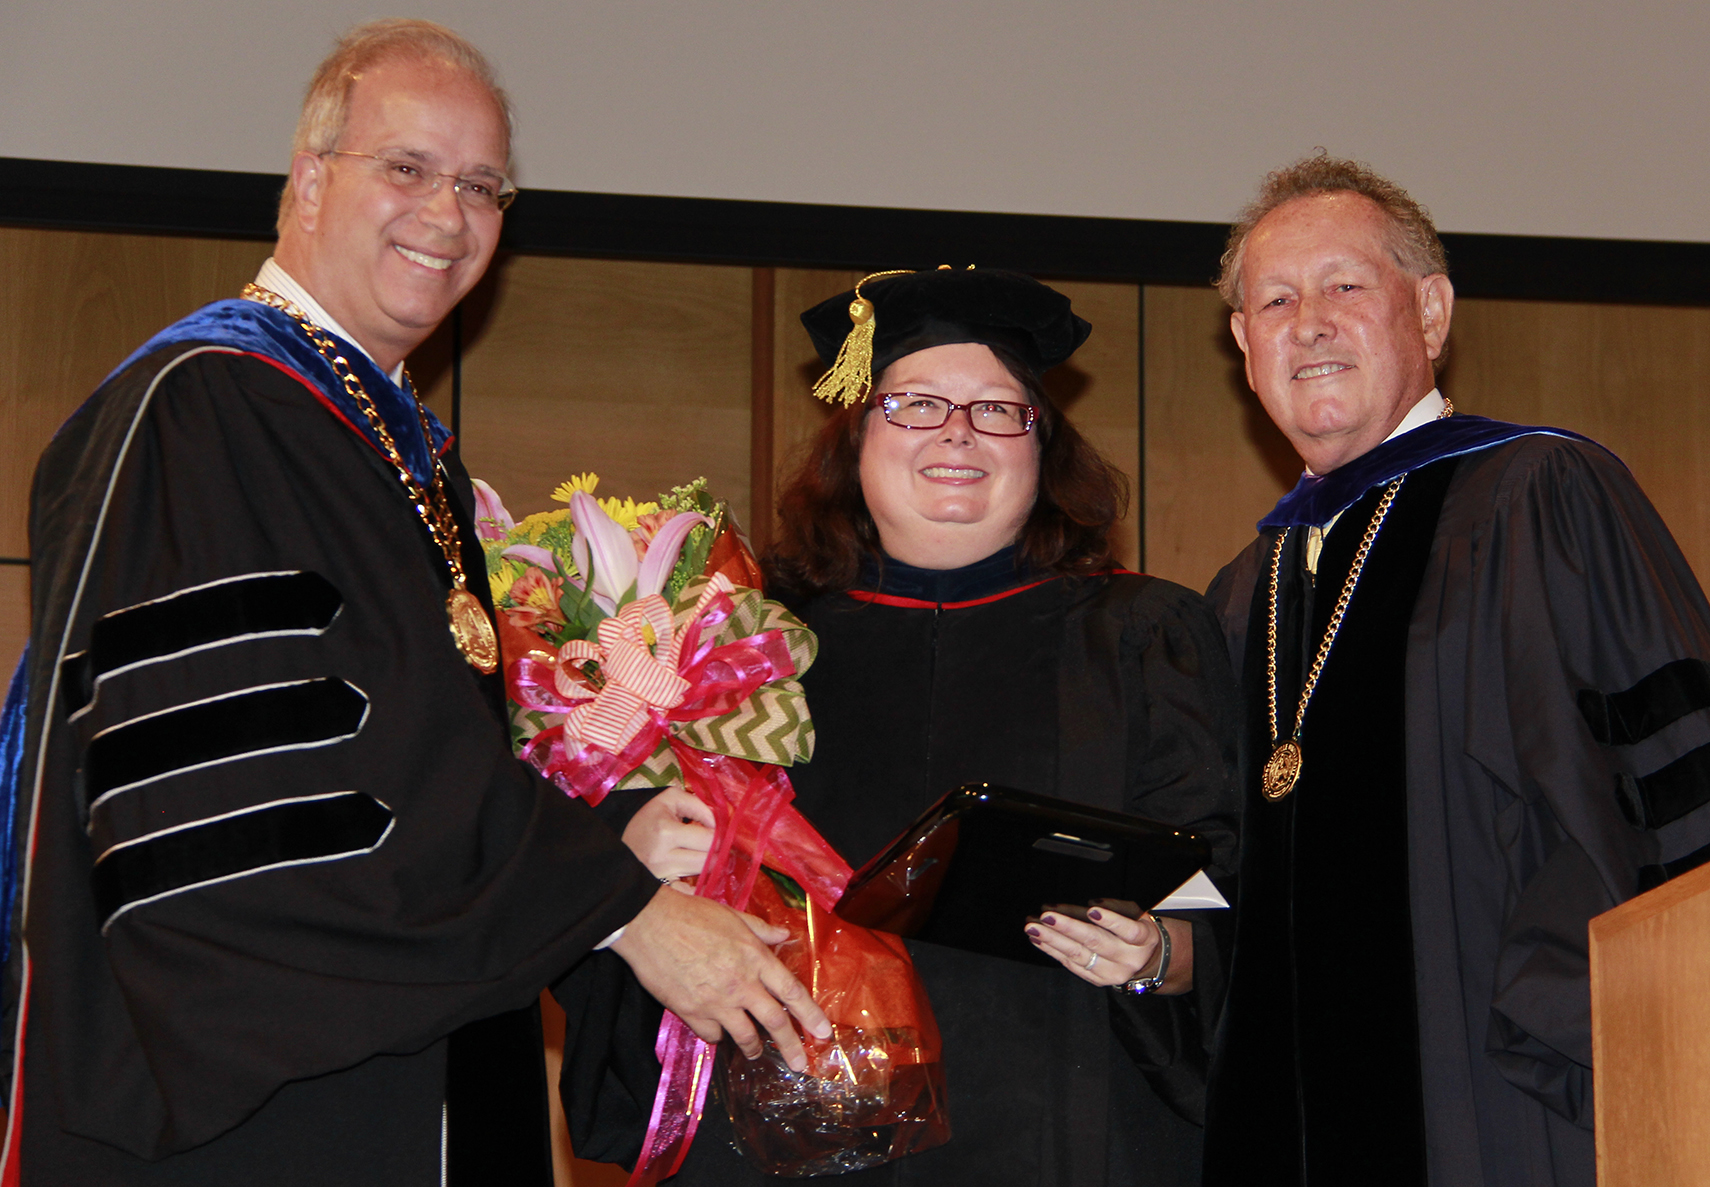 Dr. Twyla Hernandez, center, received the Non-Tentured Faculty Award from President Michael V. Carter, left, and Dr. Frank Cheatham, right, senior vice president for academic affairs. (Campbellsville University Photo by Rachel DeCoursey)